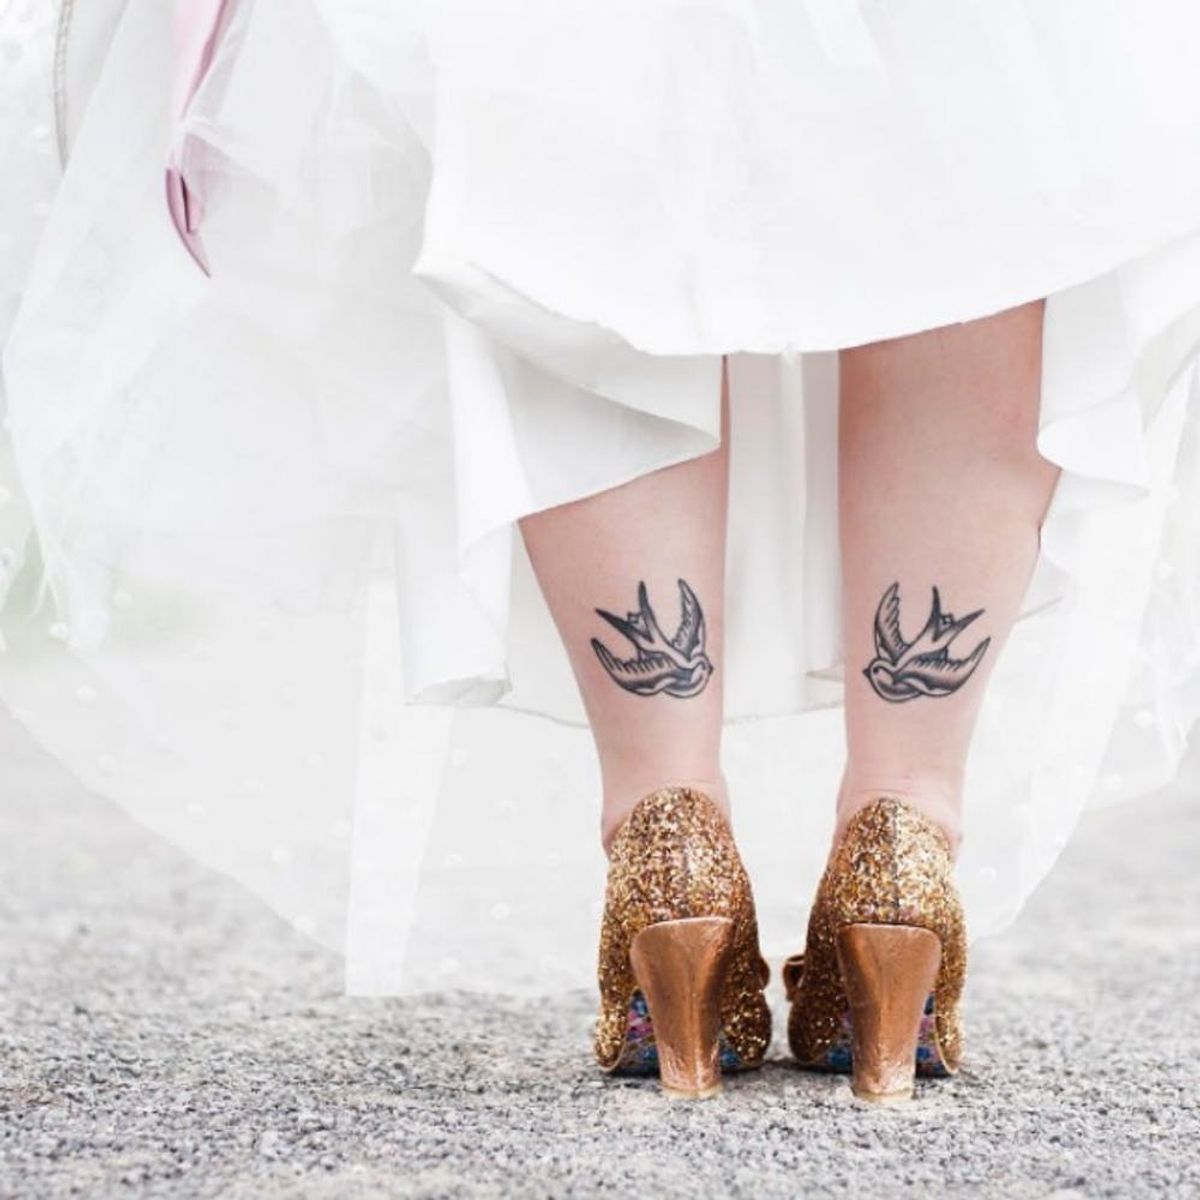 10 Ways to Rock a Tattoo on Your Wedding Day